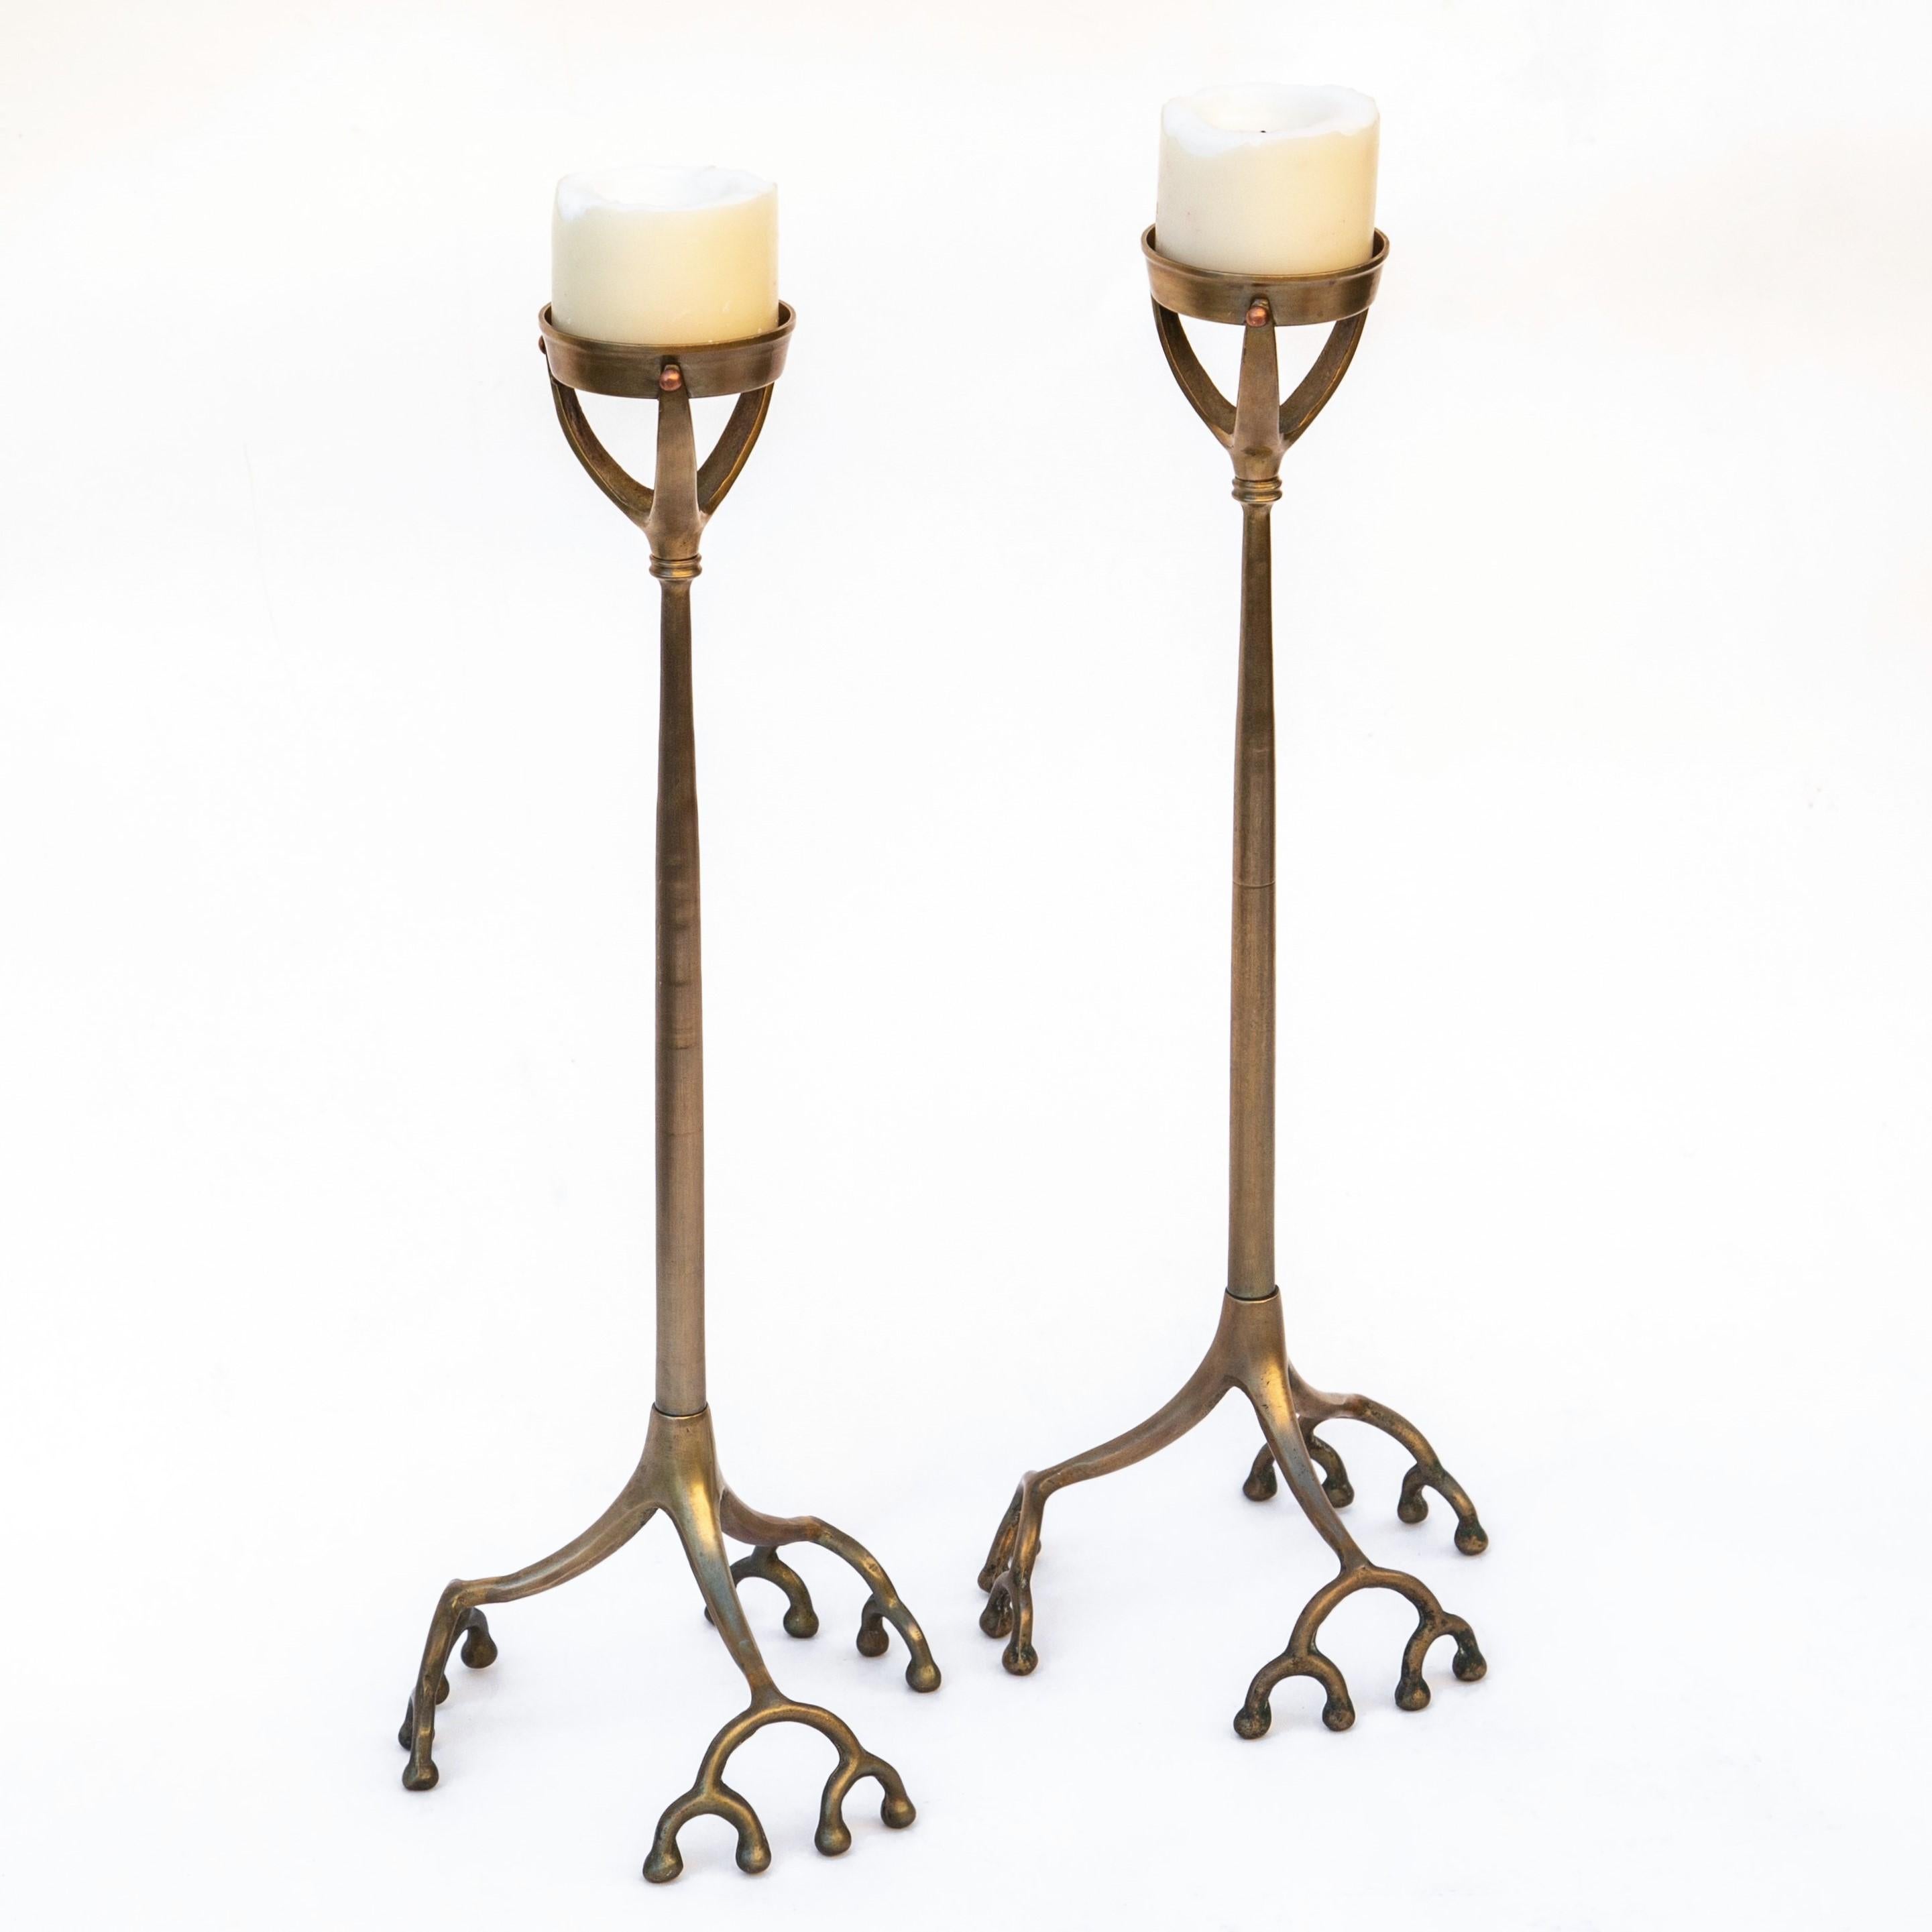 Art Nouveau Pair of Tall Tiffany Studios Style Brass Root Candlesticks